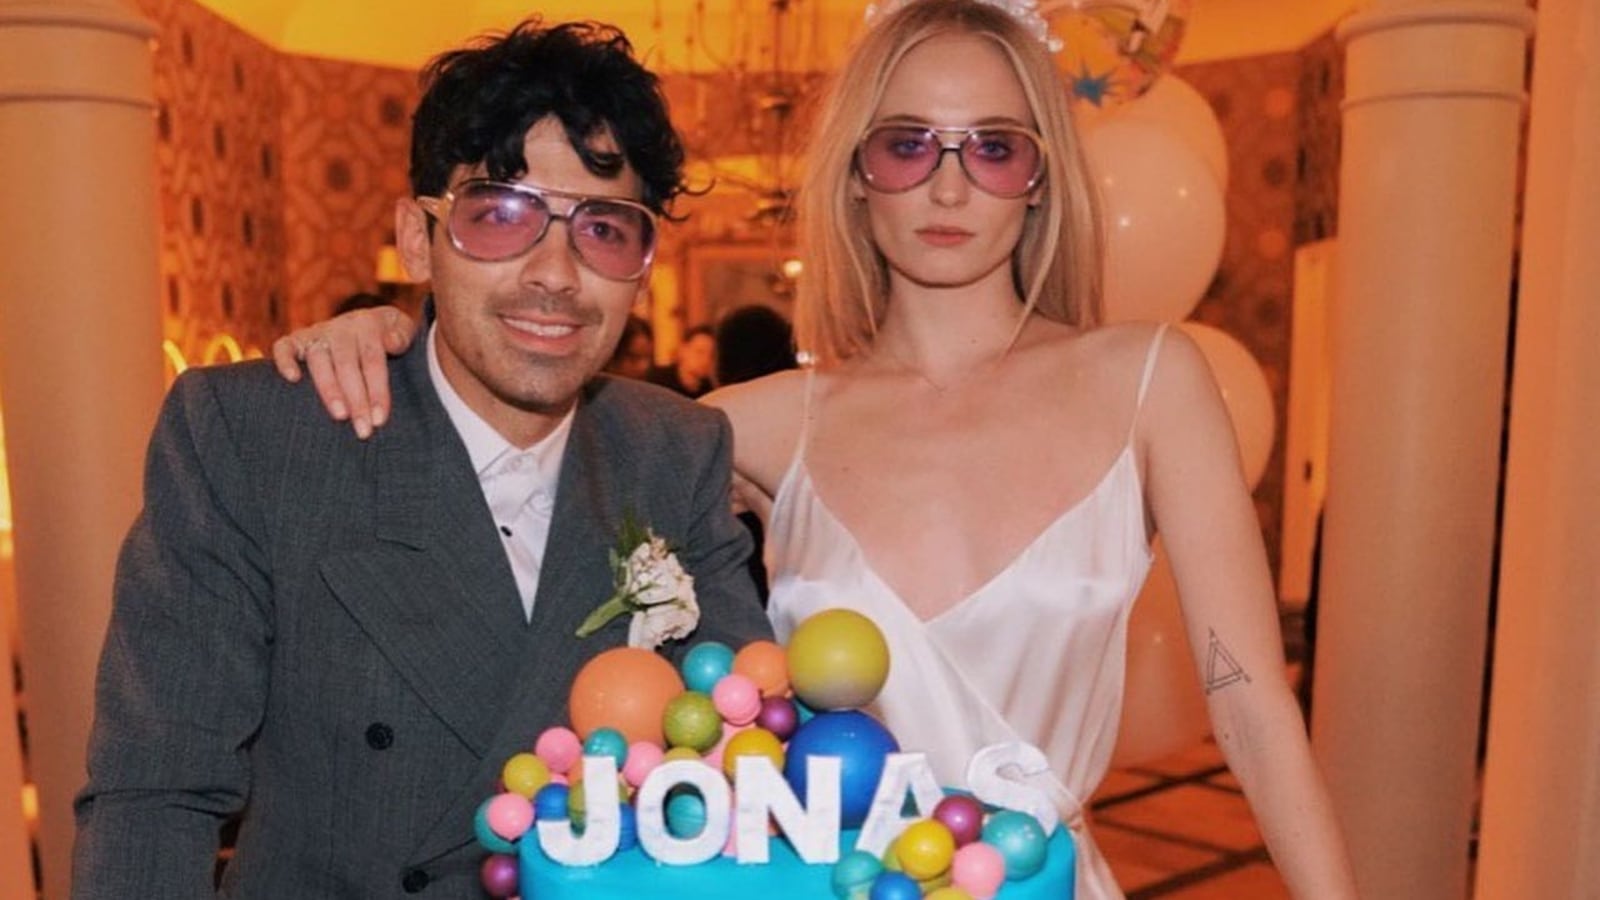 Sophie Turner and Joe Jonas expecting second child together, actress  flaunts baby bump in viral pics - India Today